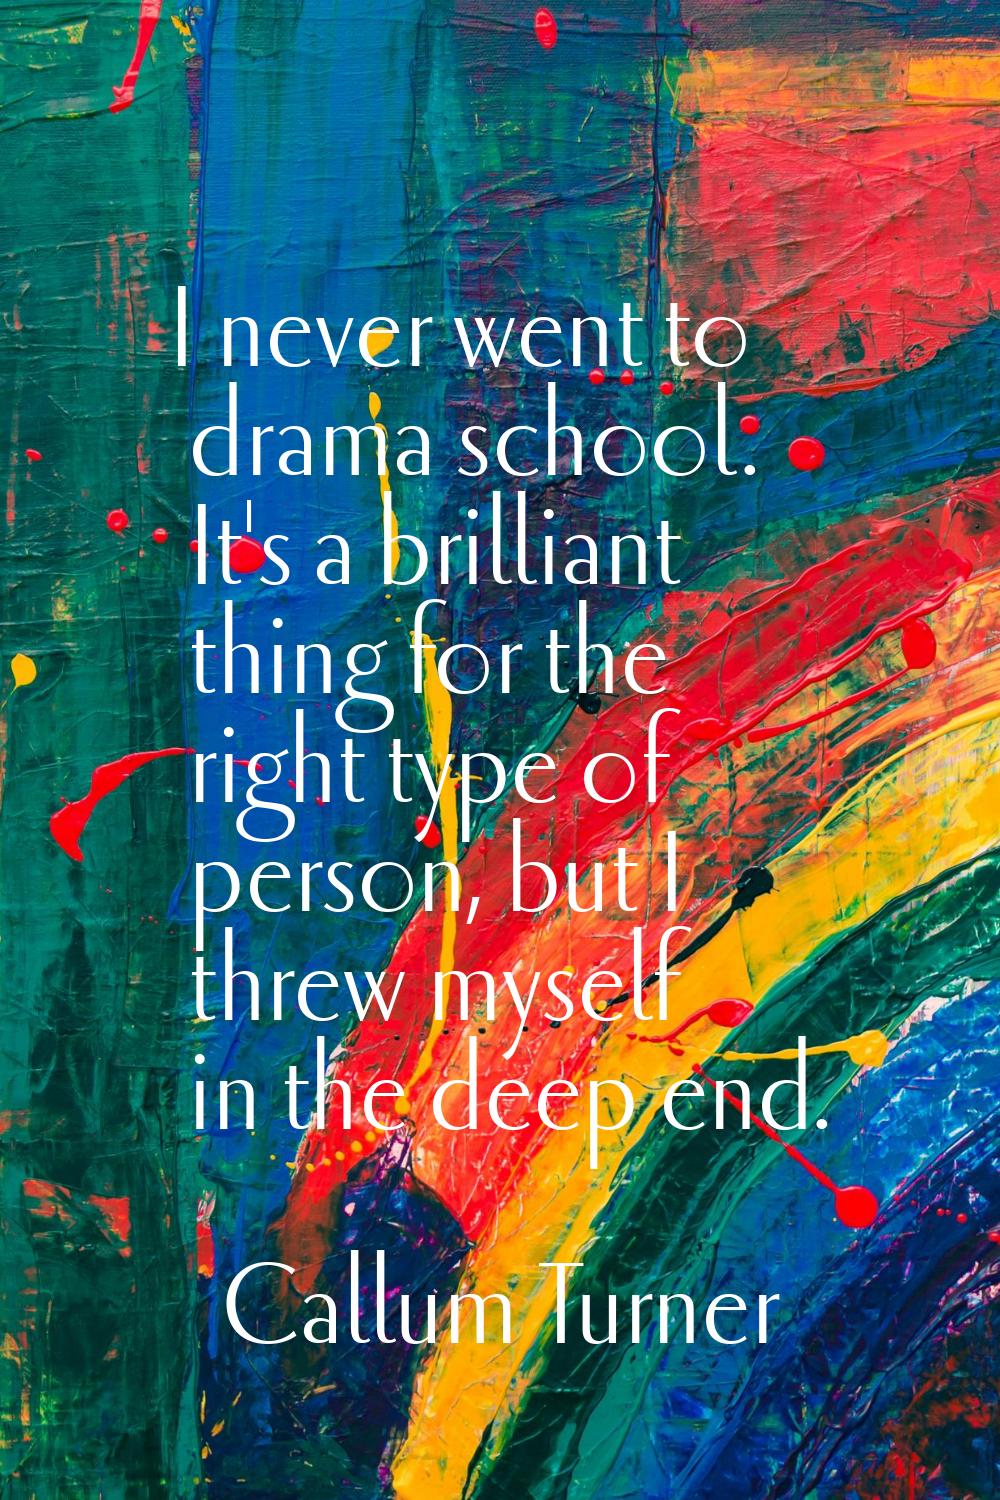 I never went to drama school. It's a brilliant thing for the right type of person, but I threw myse